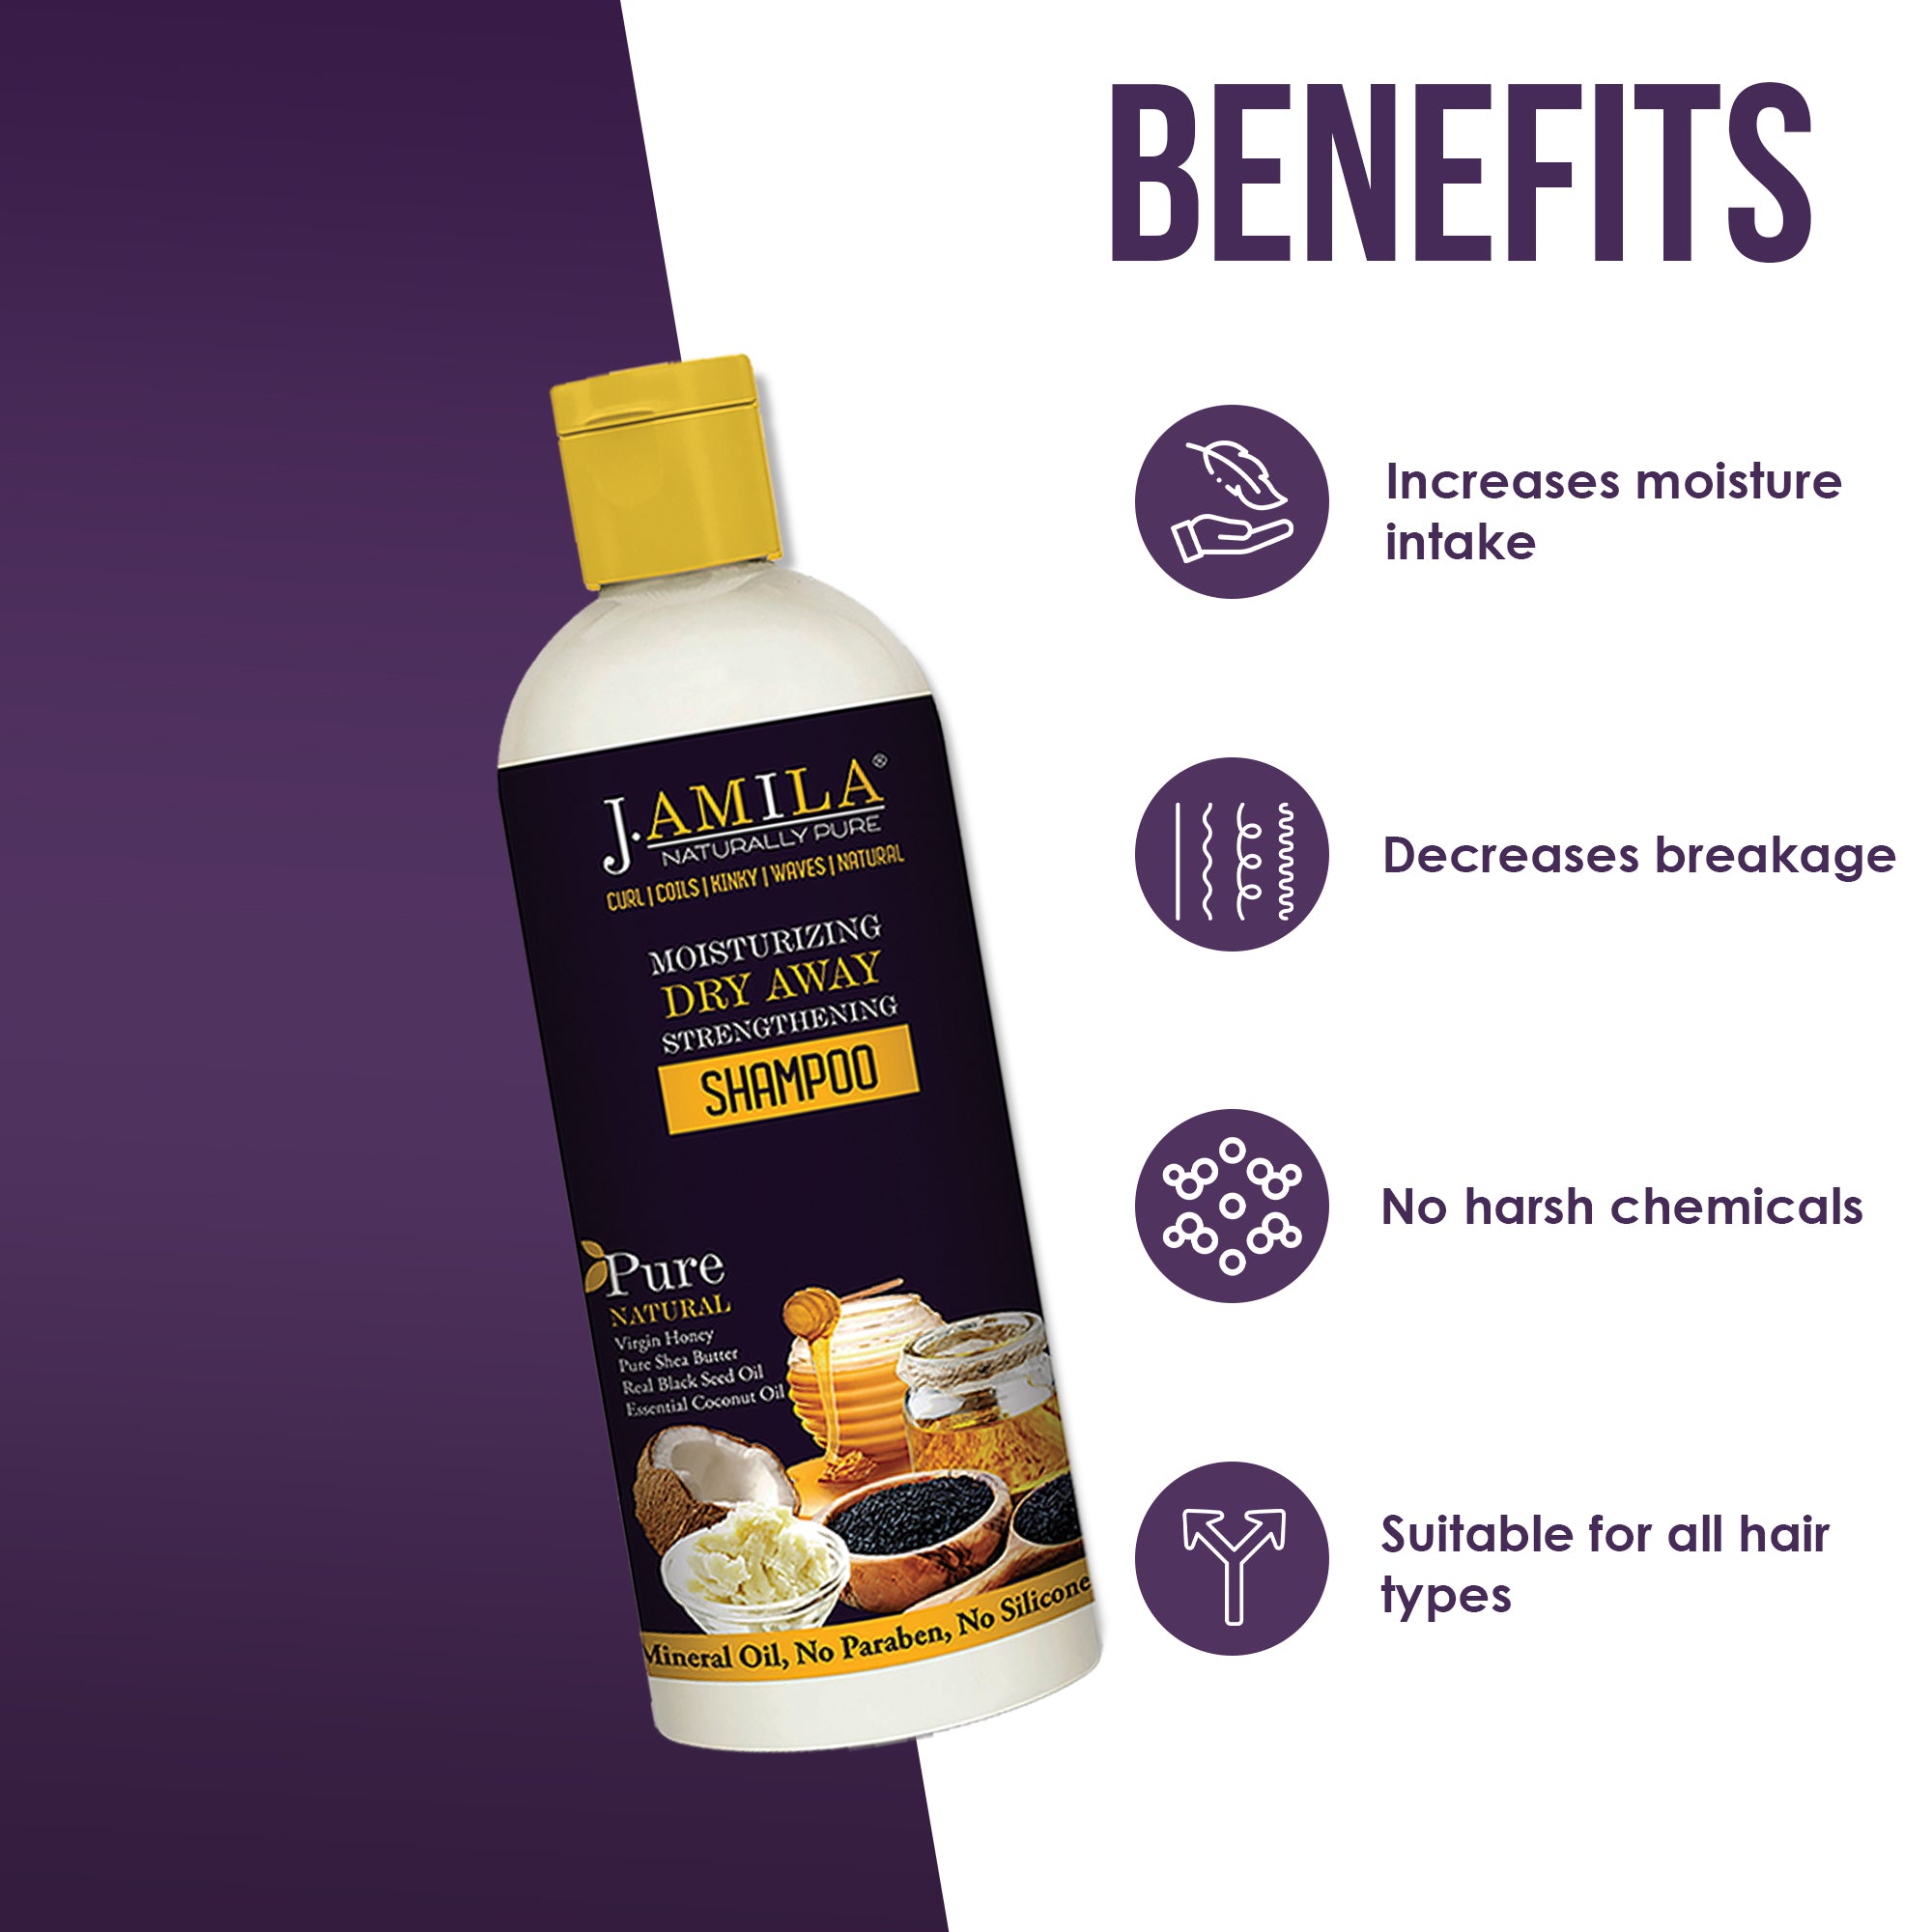 J. AMILA Naturally Hair Care Pure Moisturizing Dry Away Strengthening Shampoo Deeply Moistrizes And Hydrates With Coconut &amp; Black Seed Oil For All Hair Types (12 oz)